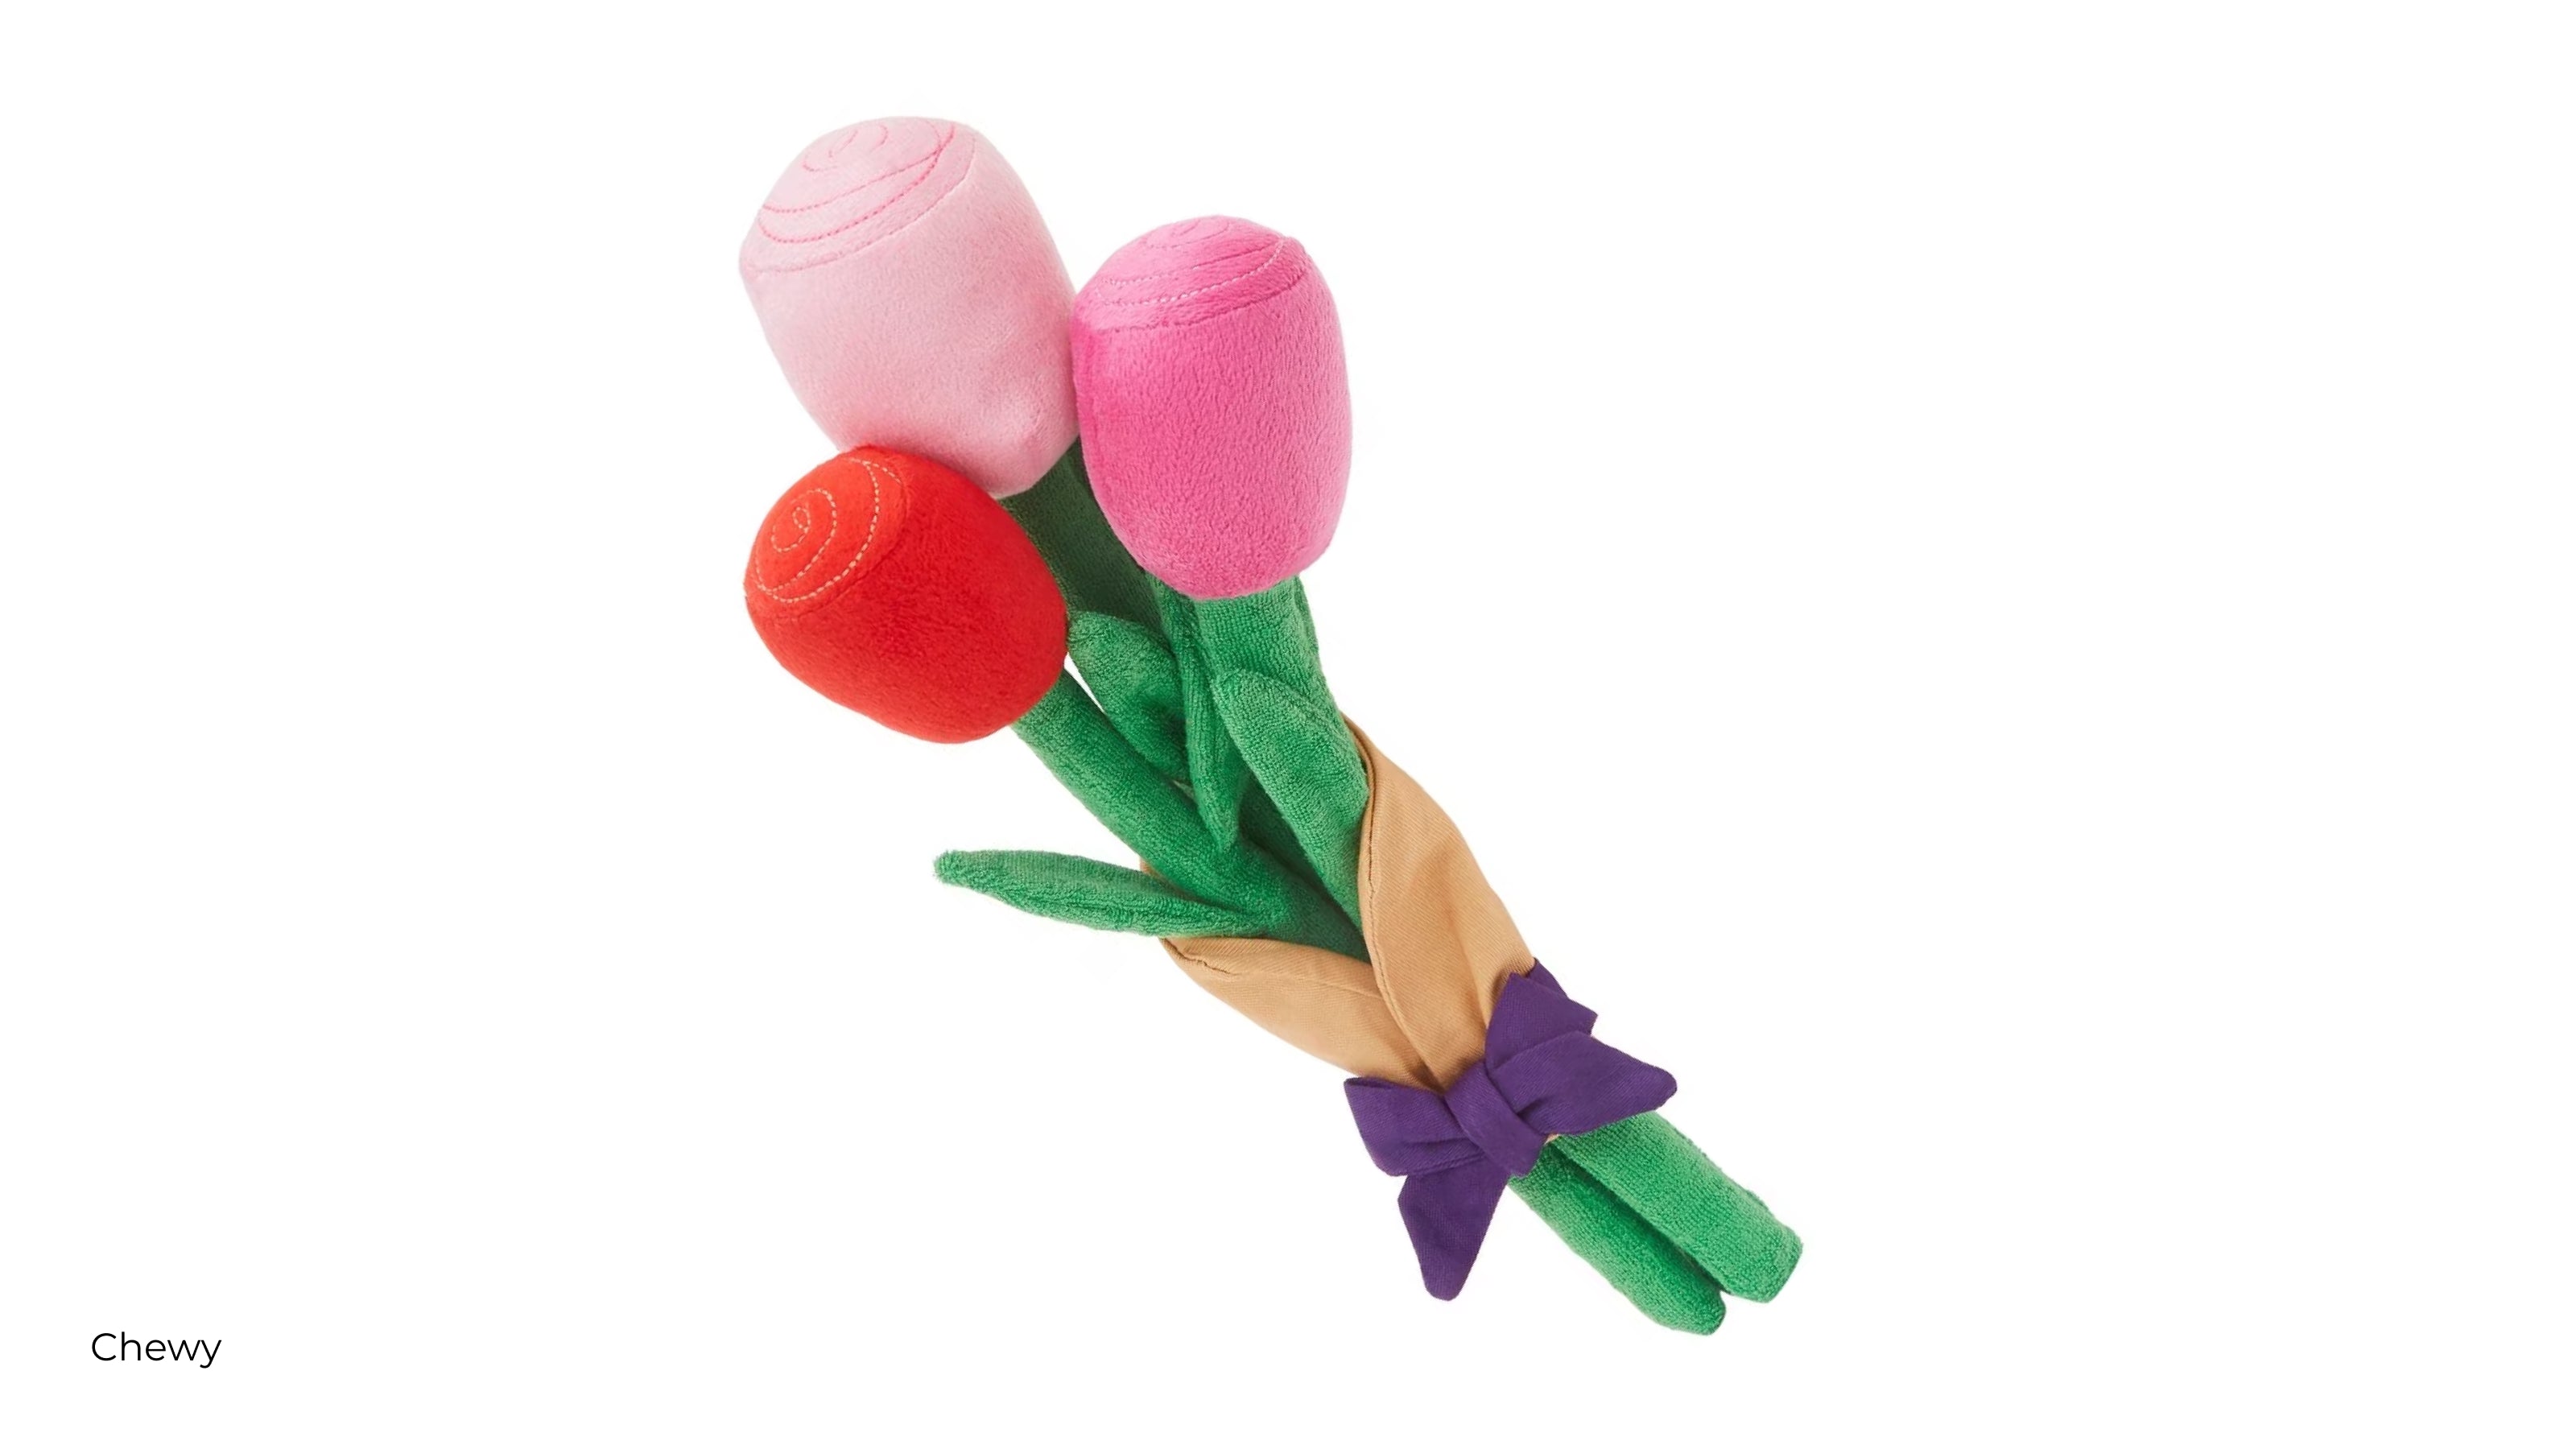 A bouquet of flowers dog toy with red light pink and bright pink buds and a purple ribbon tying them together